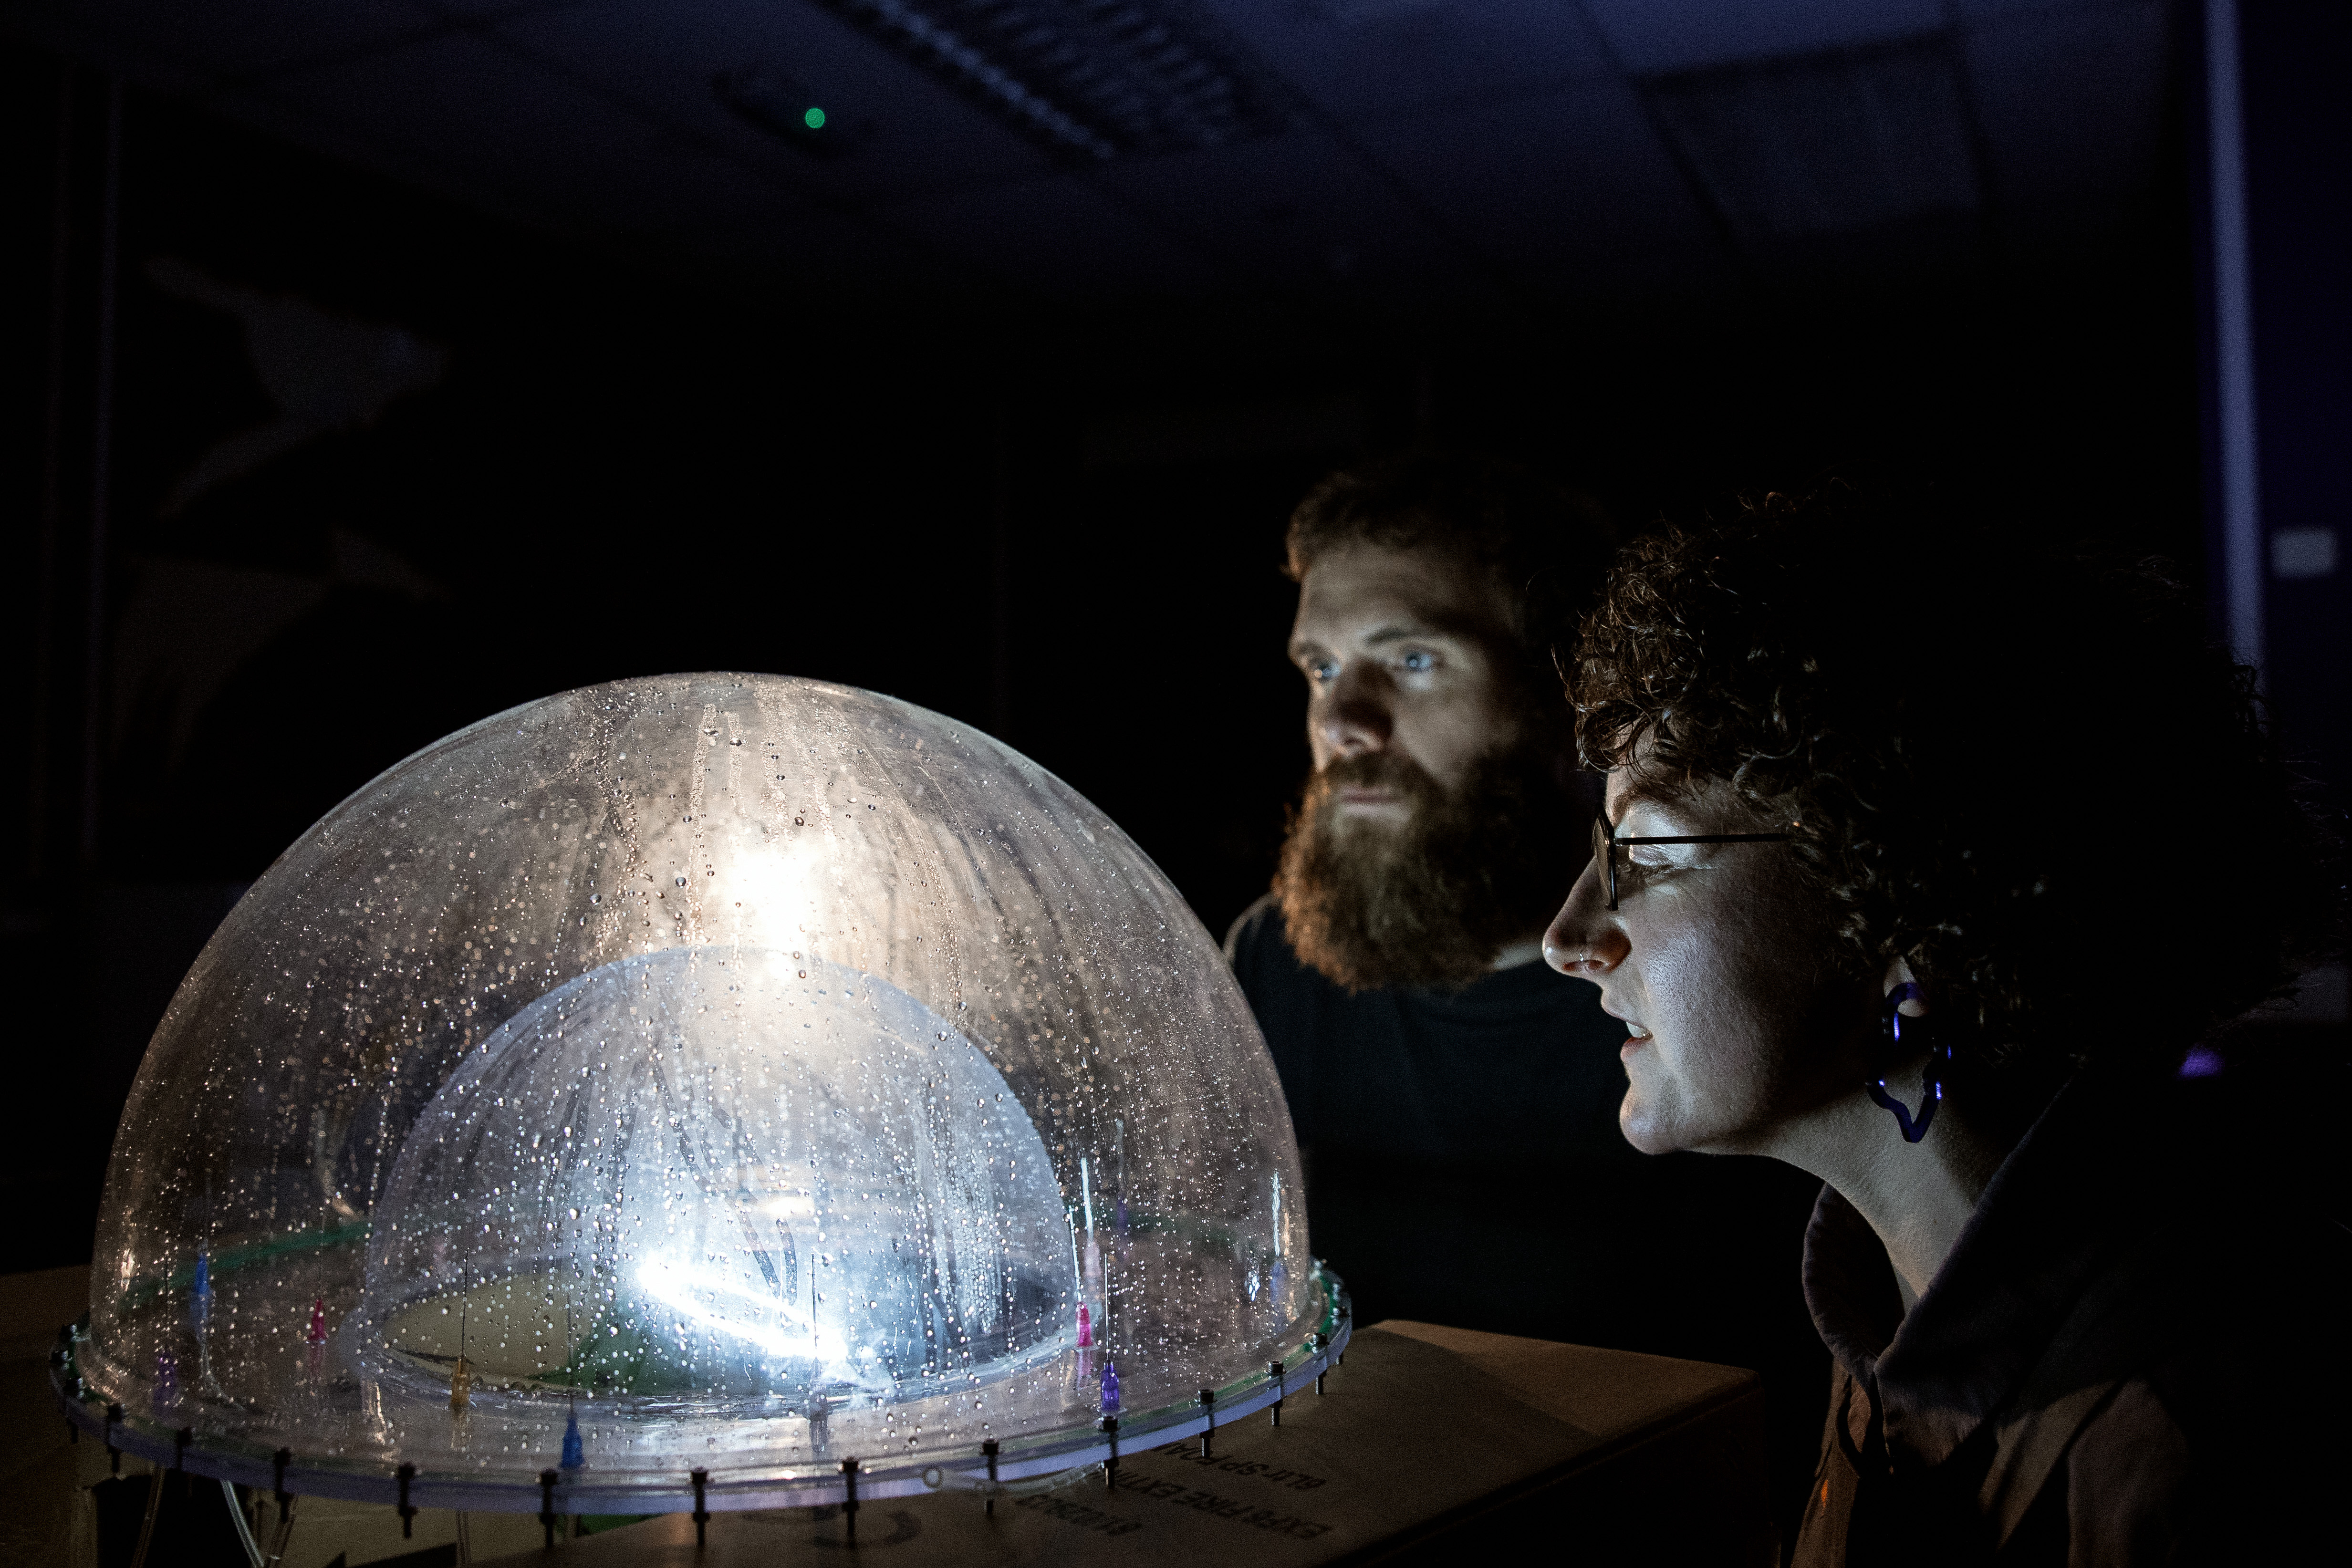 Two people looking into an illuminated plastic dome